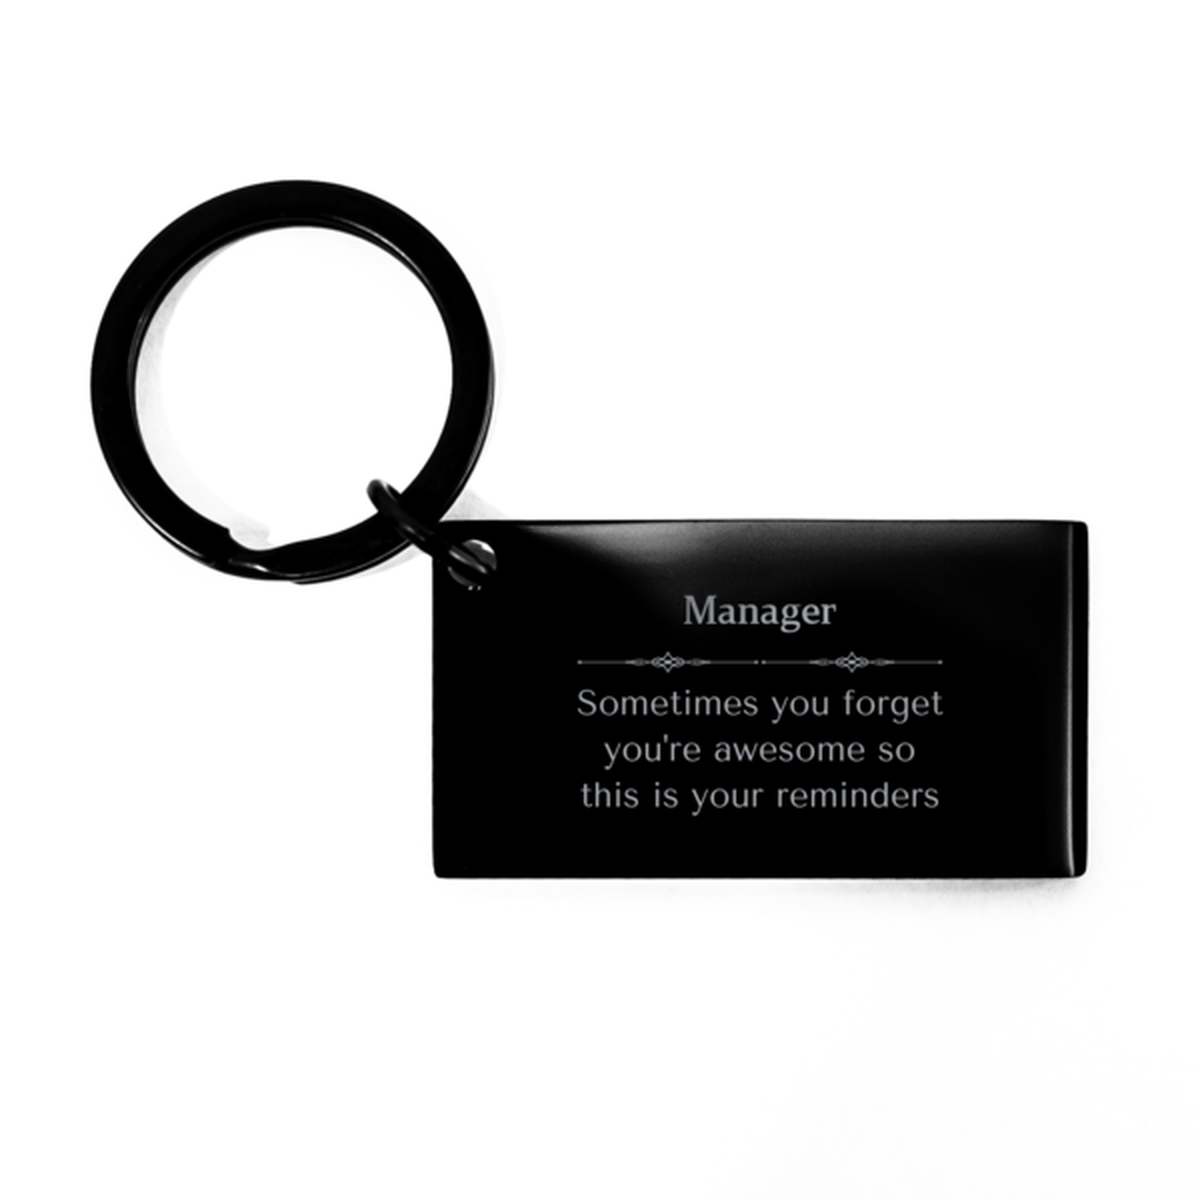 Sentimental Manager Keychain, Occupational Therapist Sometimes you forget you're awesome so this is your reminders, Graduation Christmas Birthday Gifts for Manager, Men, Women, Coworkers